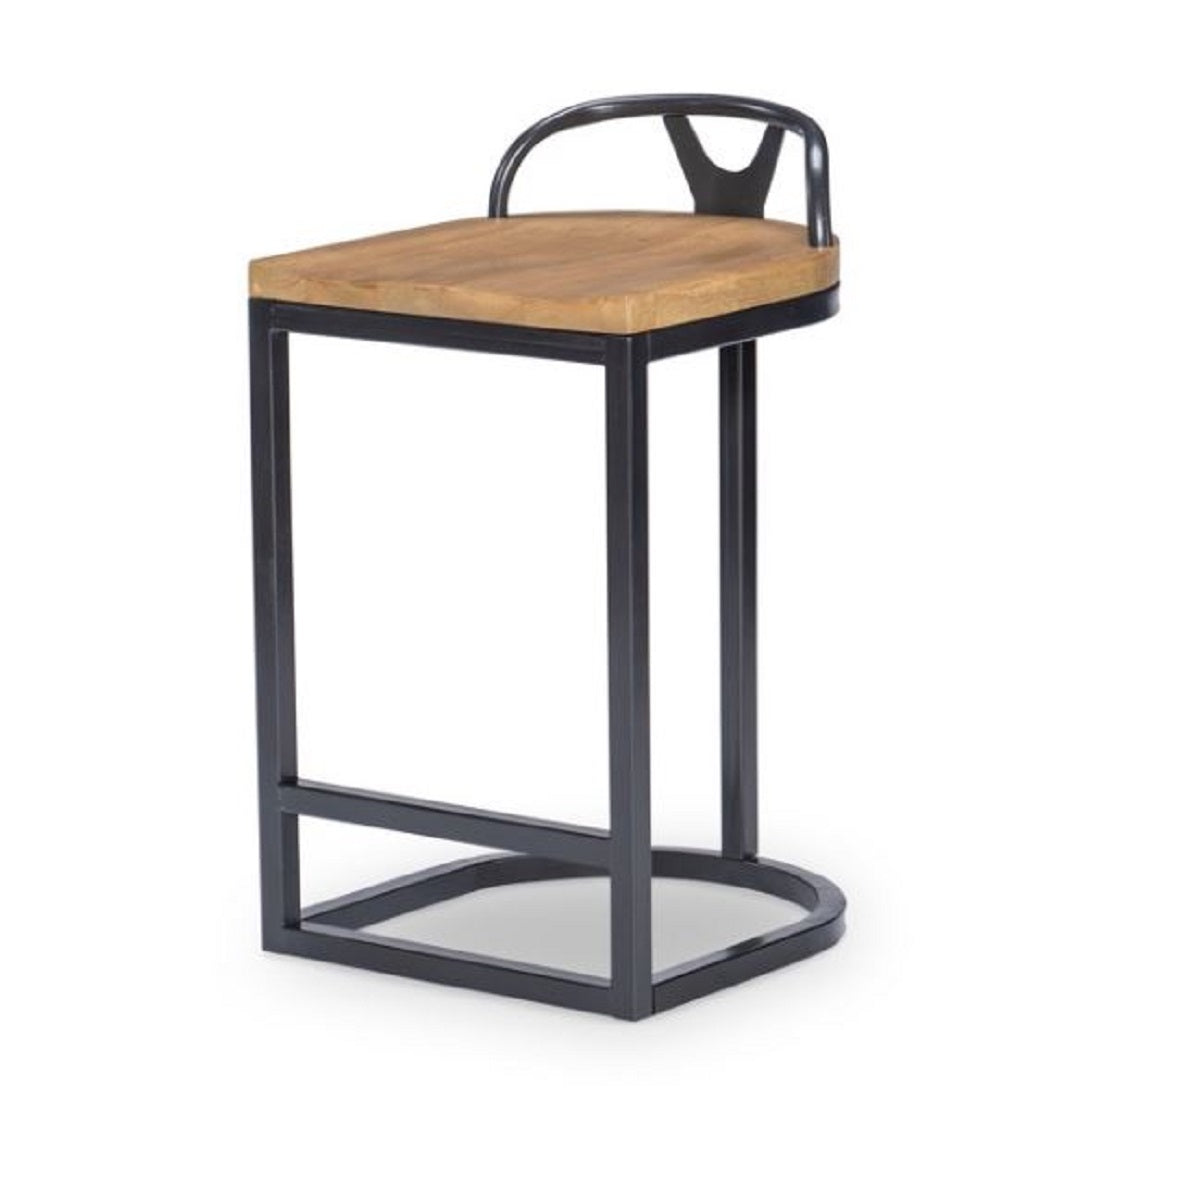 The Franklin Stool by Legacy. Simple farmhouse details and motifs create visual interest that contrast with the low, curved back to create a modern feel. Harvest Oak seats on quartered white oak veneer are attached to an aged black painted base.